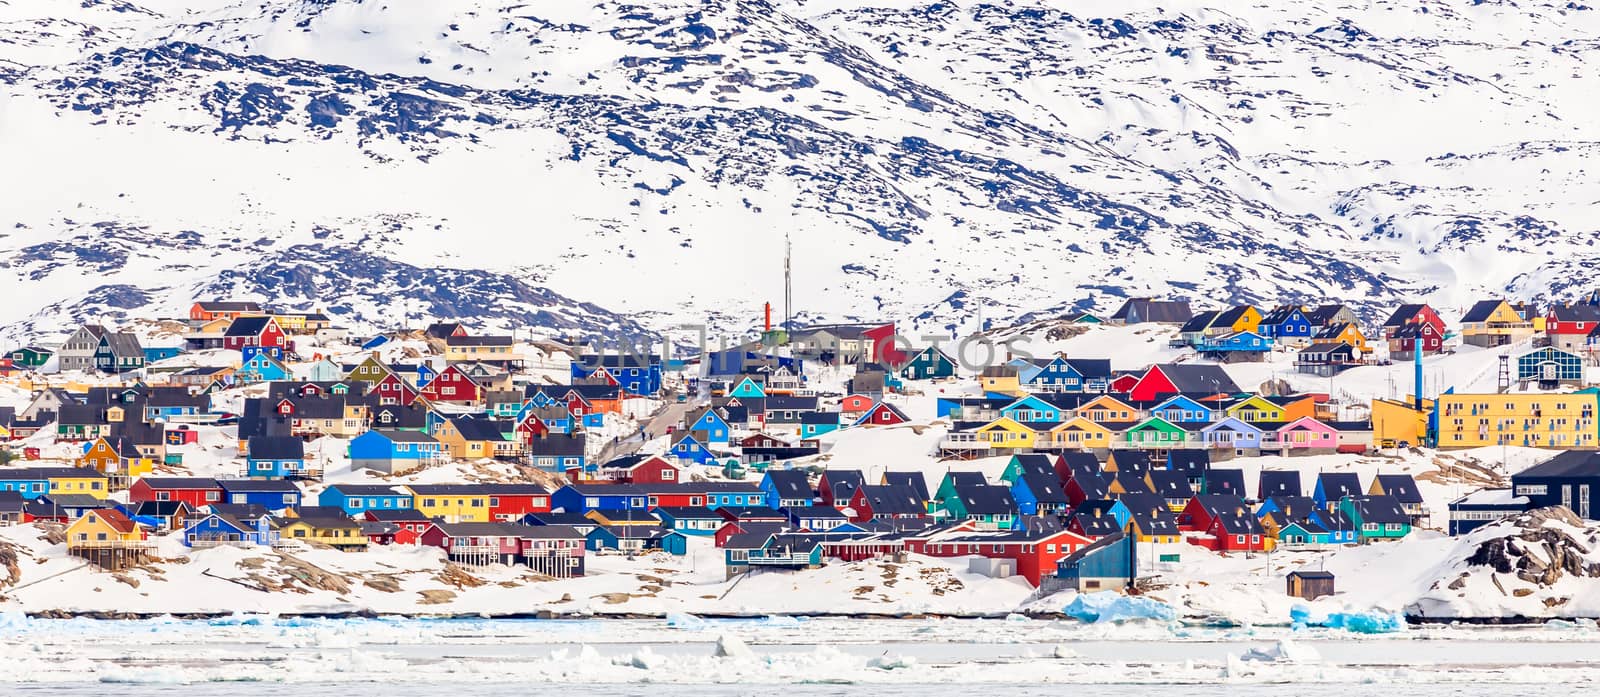 Arctic city center panorama with colorful Inuit houses on the ro by ambeon